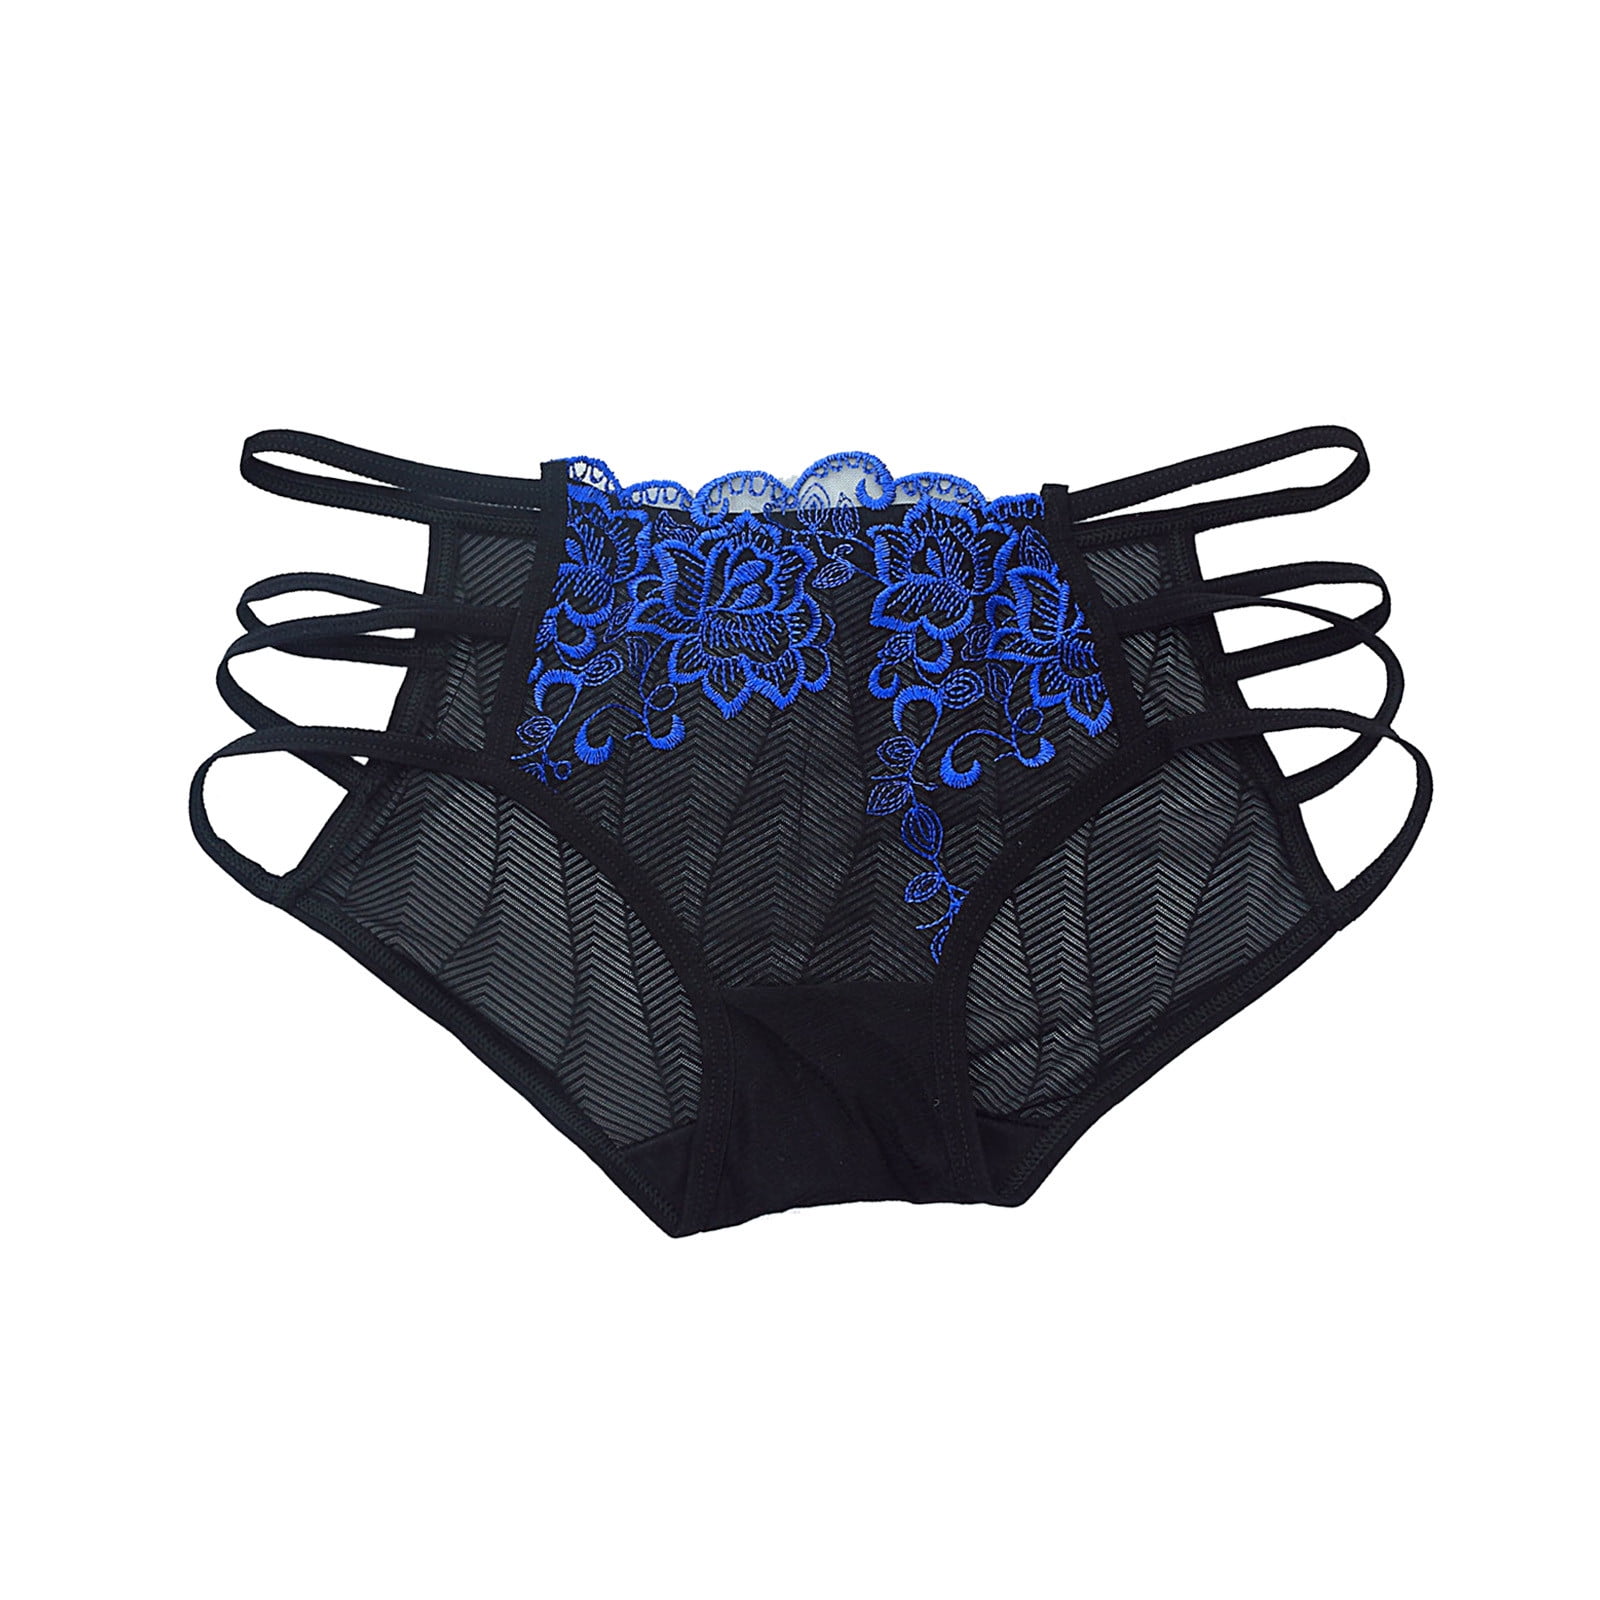 Lace Hip Up Panties Lingeries Hollow See Through Briefs Panty High Waist  Slim Women Underwears Clothes Mujeres Ropa Interior From  Harrypotter_jewelry, $2.44